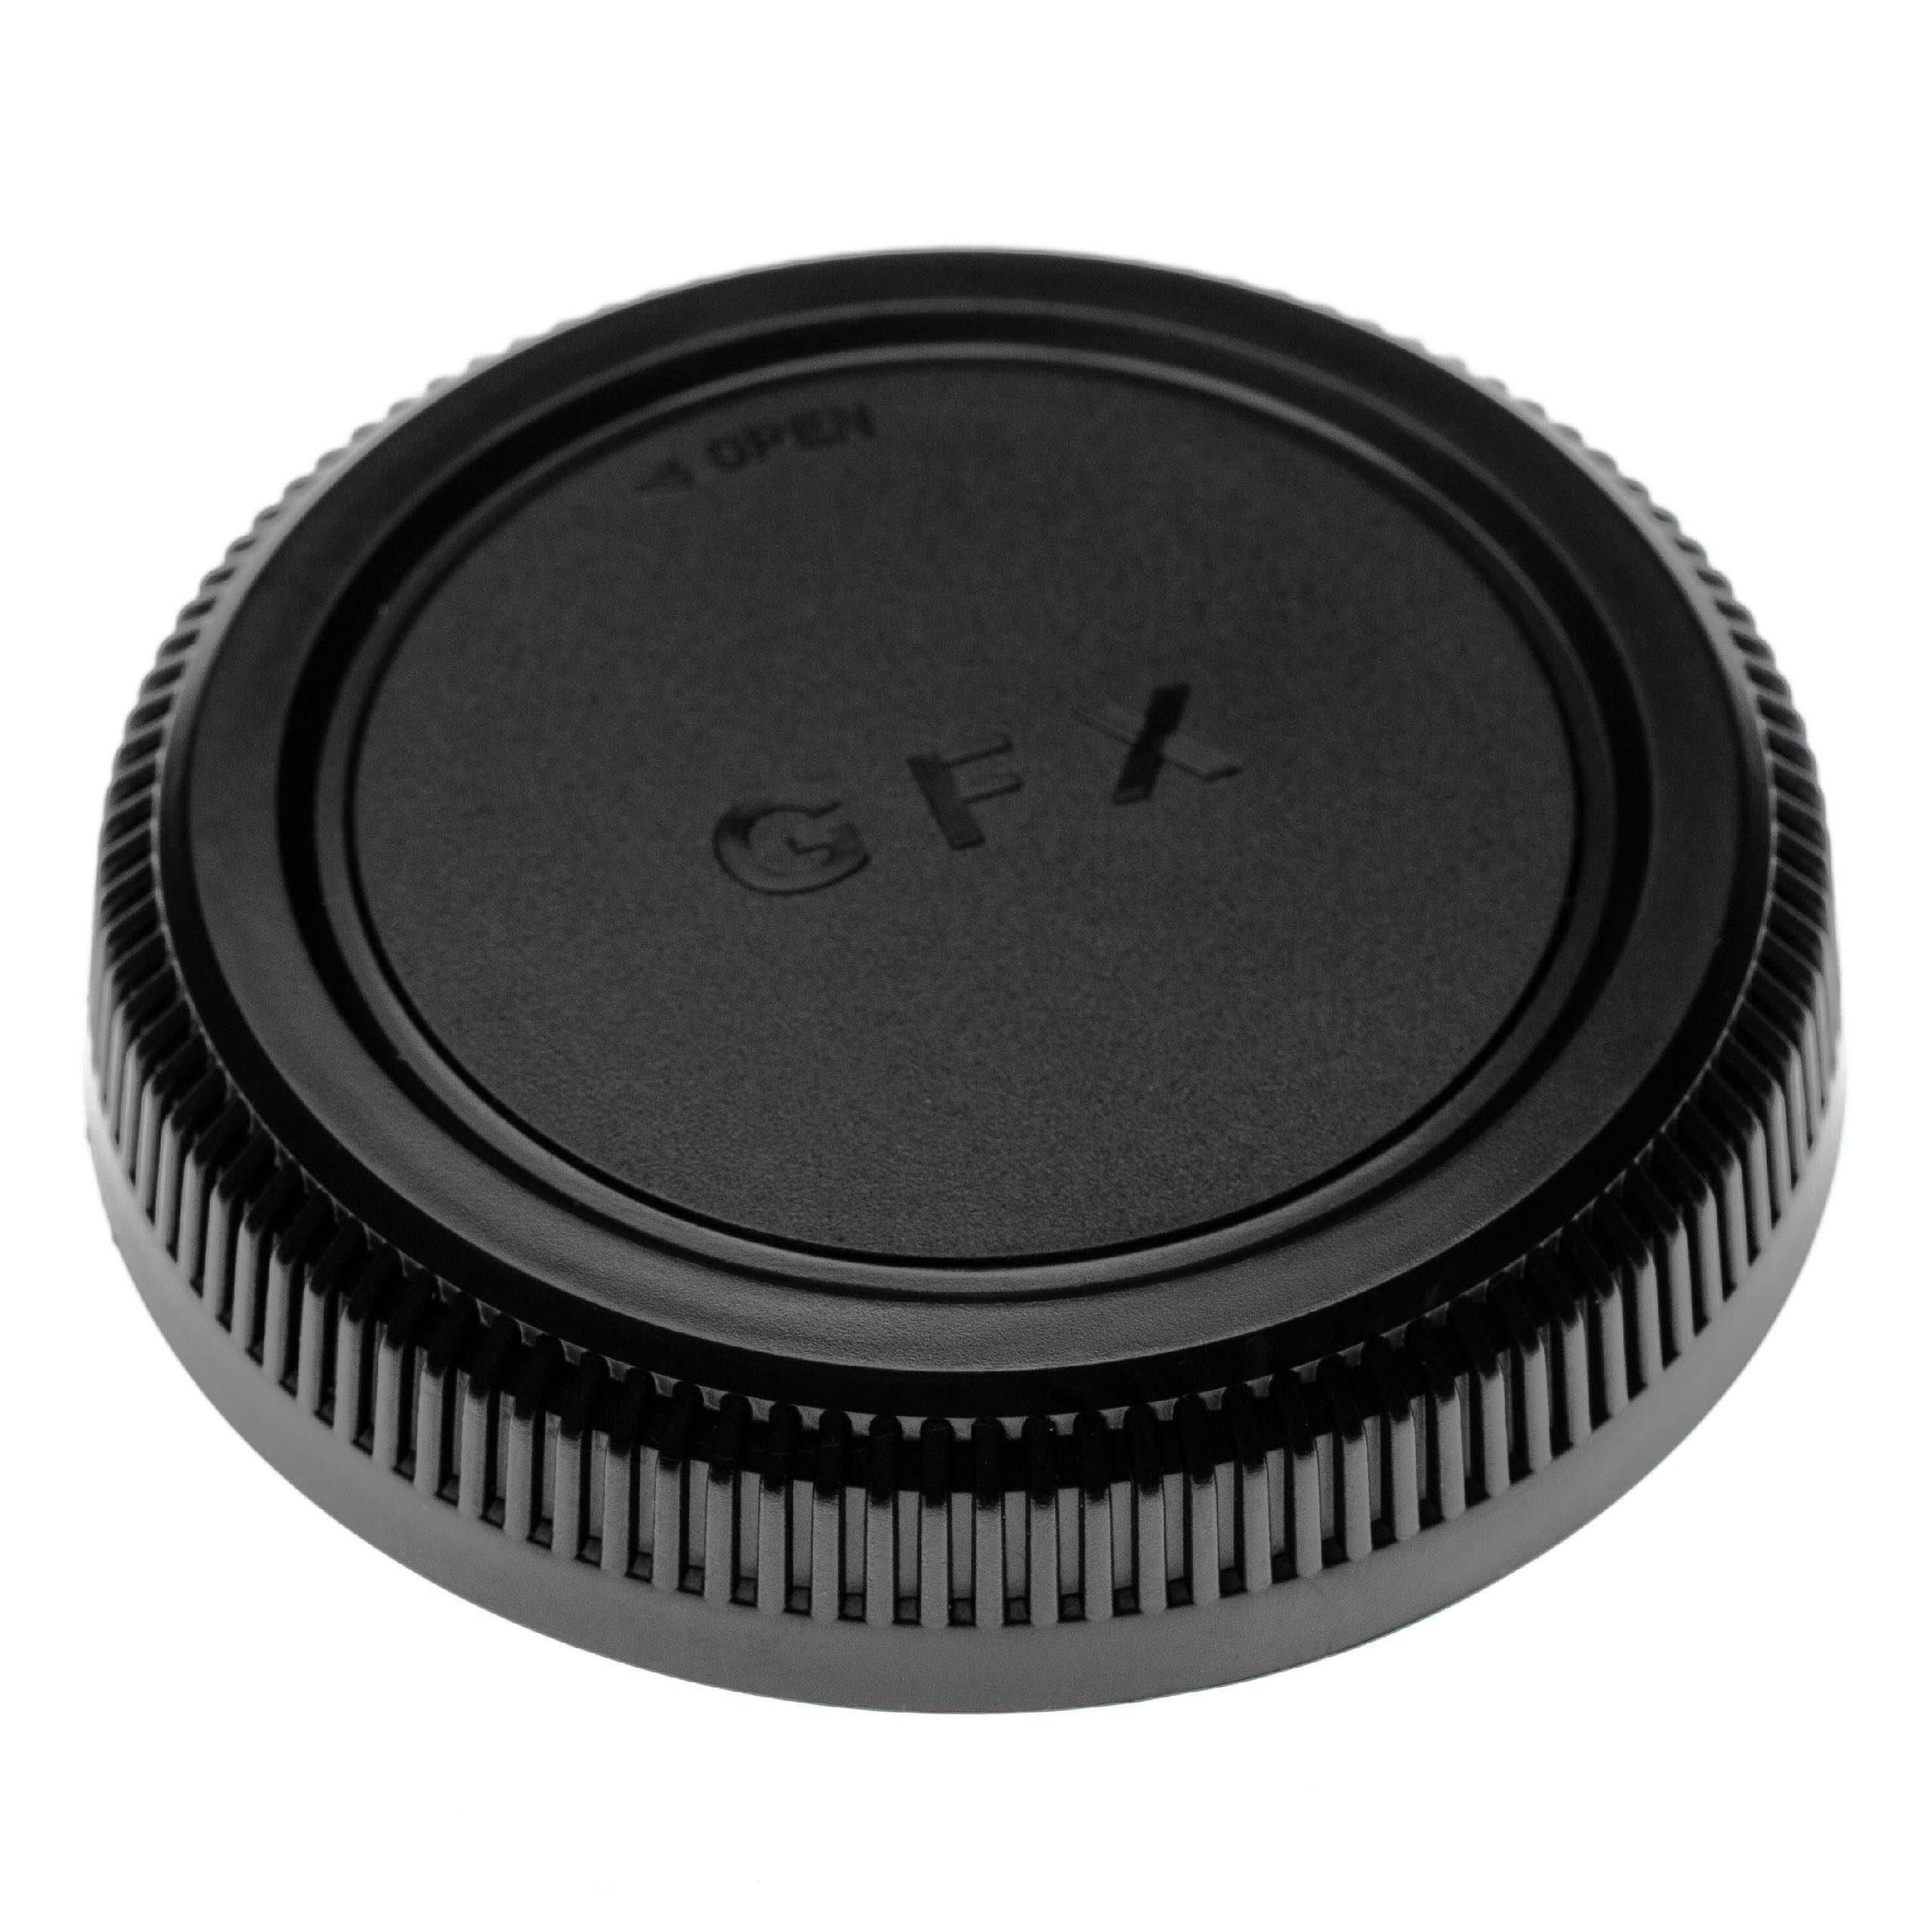  Lens Rear Cap as Replacement for Fuji / Fujifilm RLCP-002 for with G-bayonet - Black